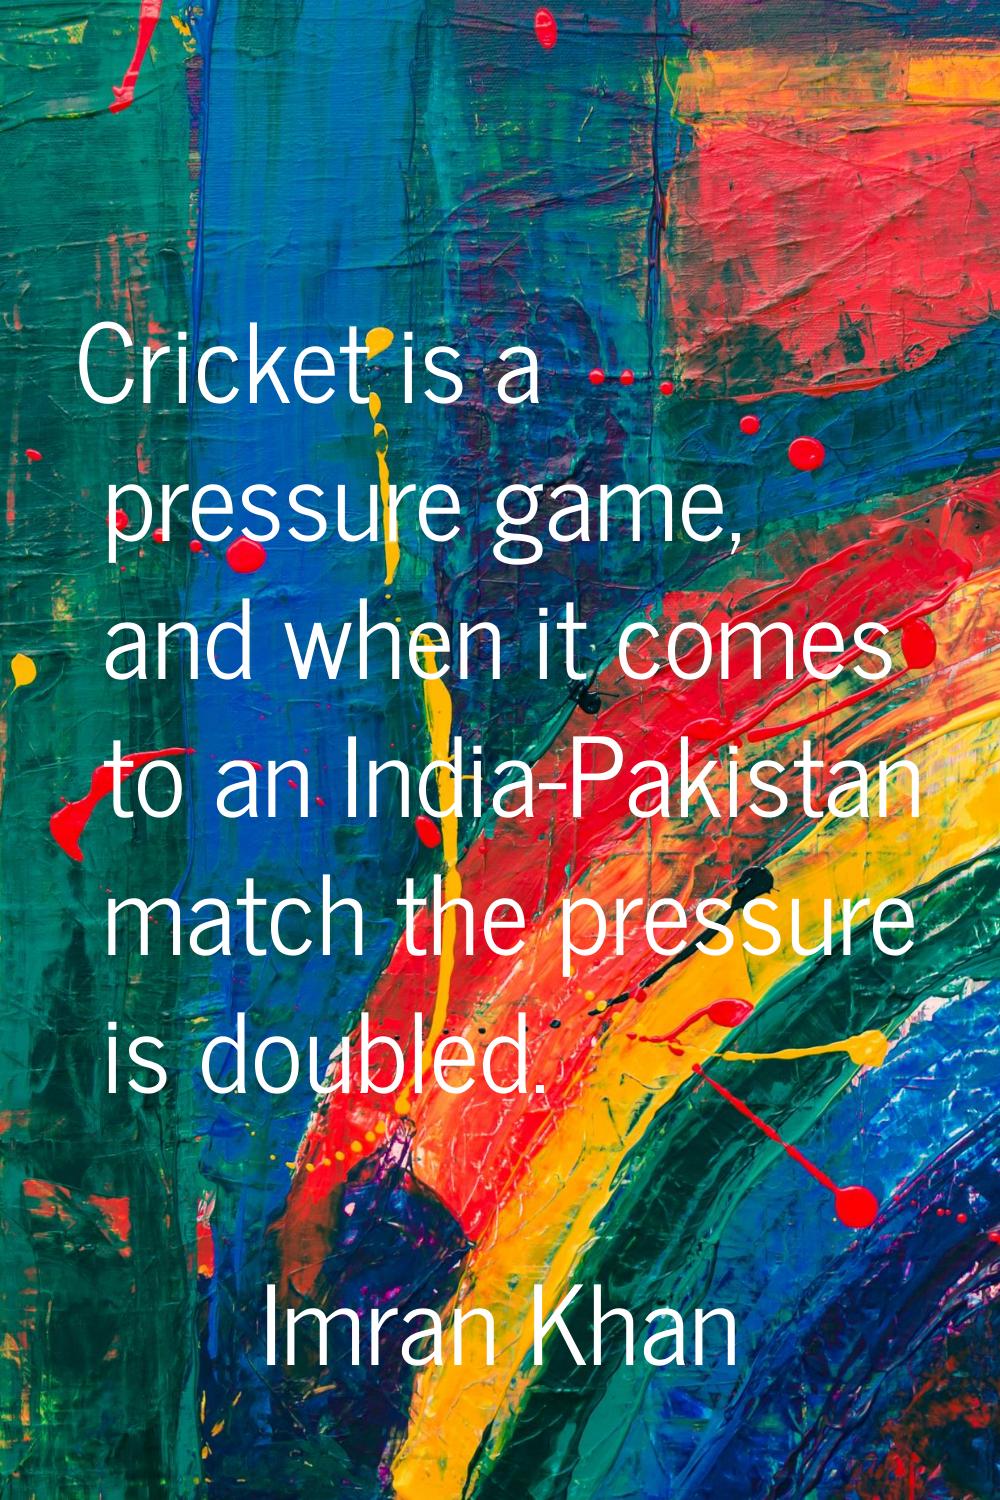 Cricket is a pressure game, and when it comes to an India-Pakistan match the pressure is doubled.